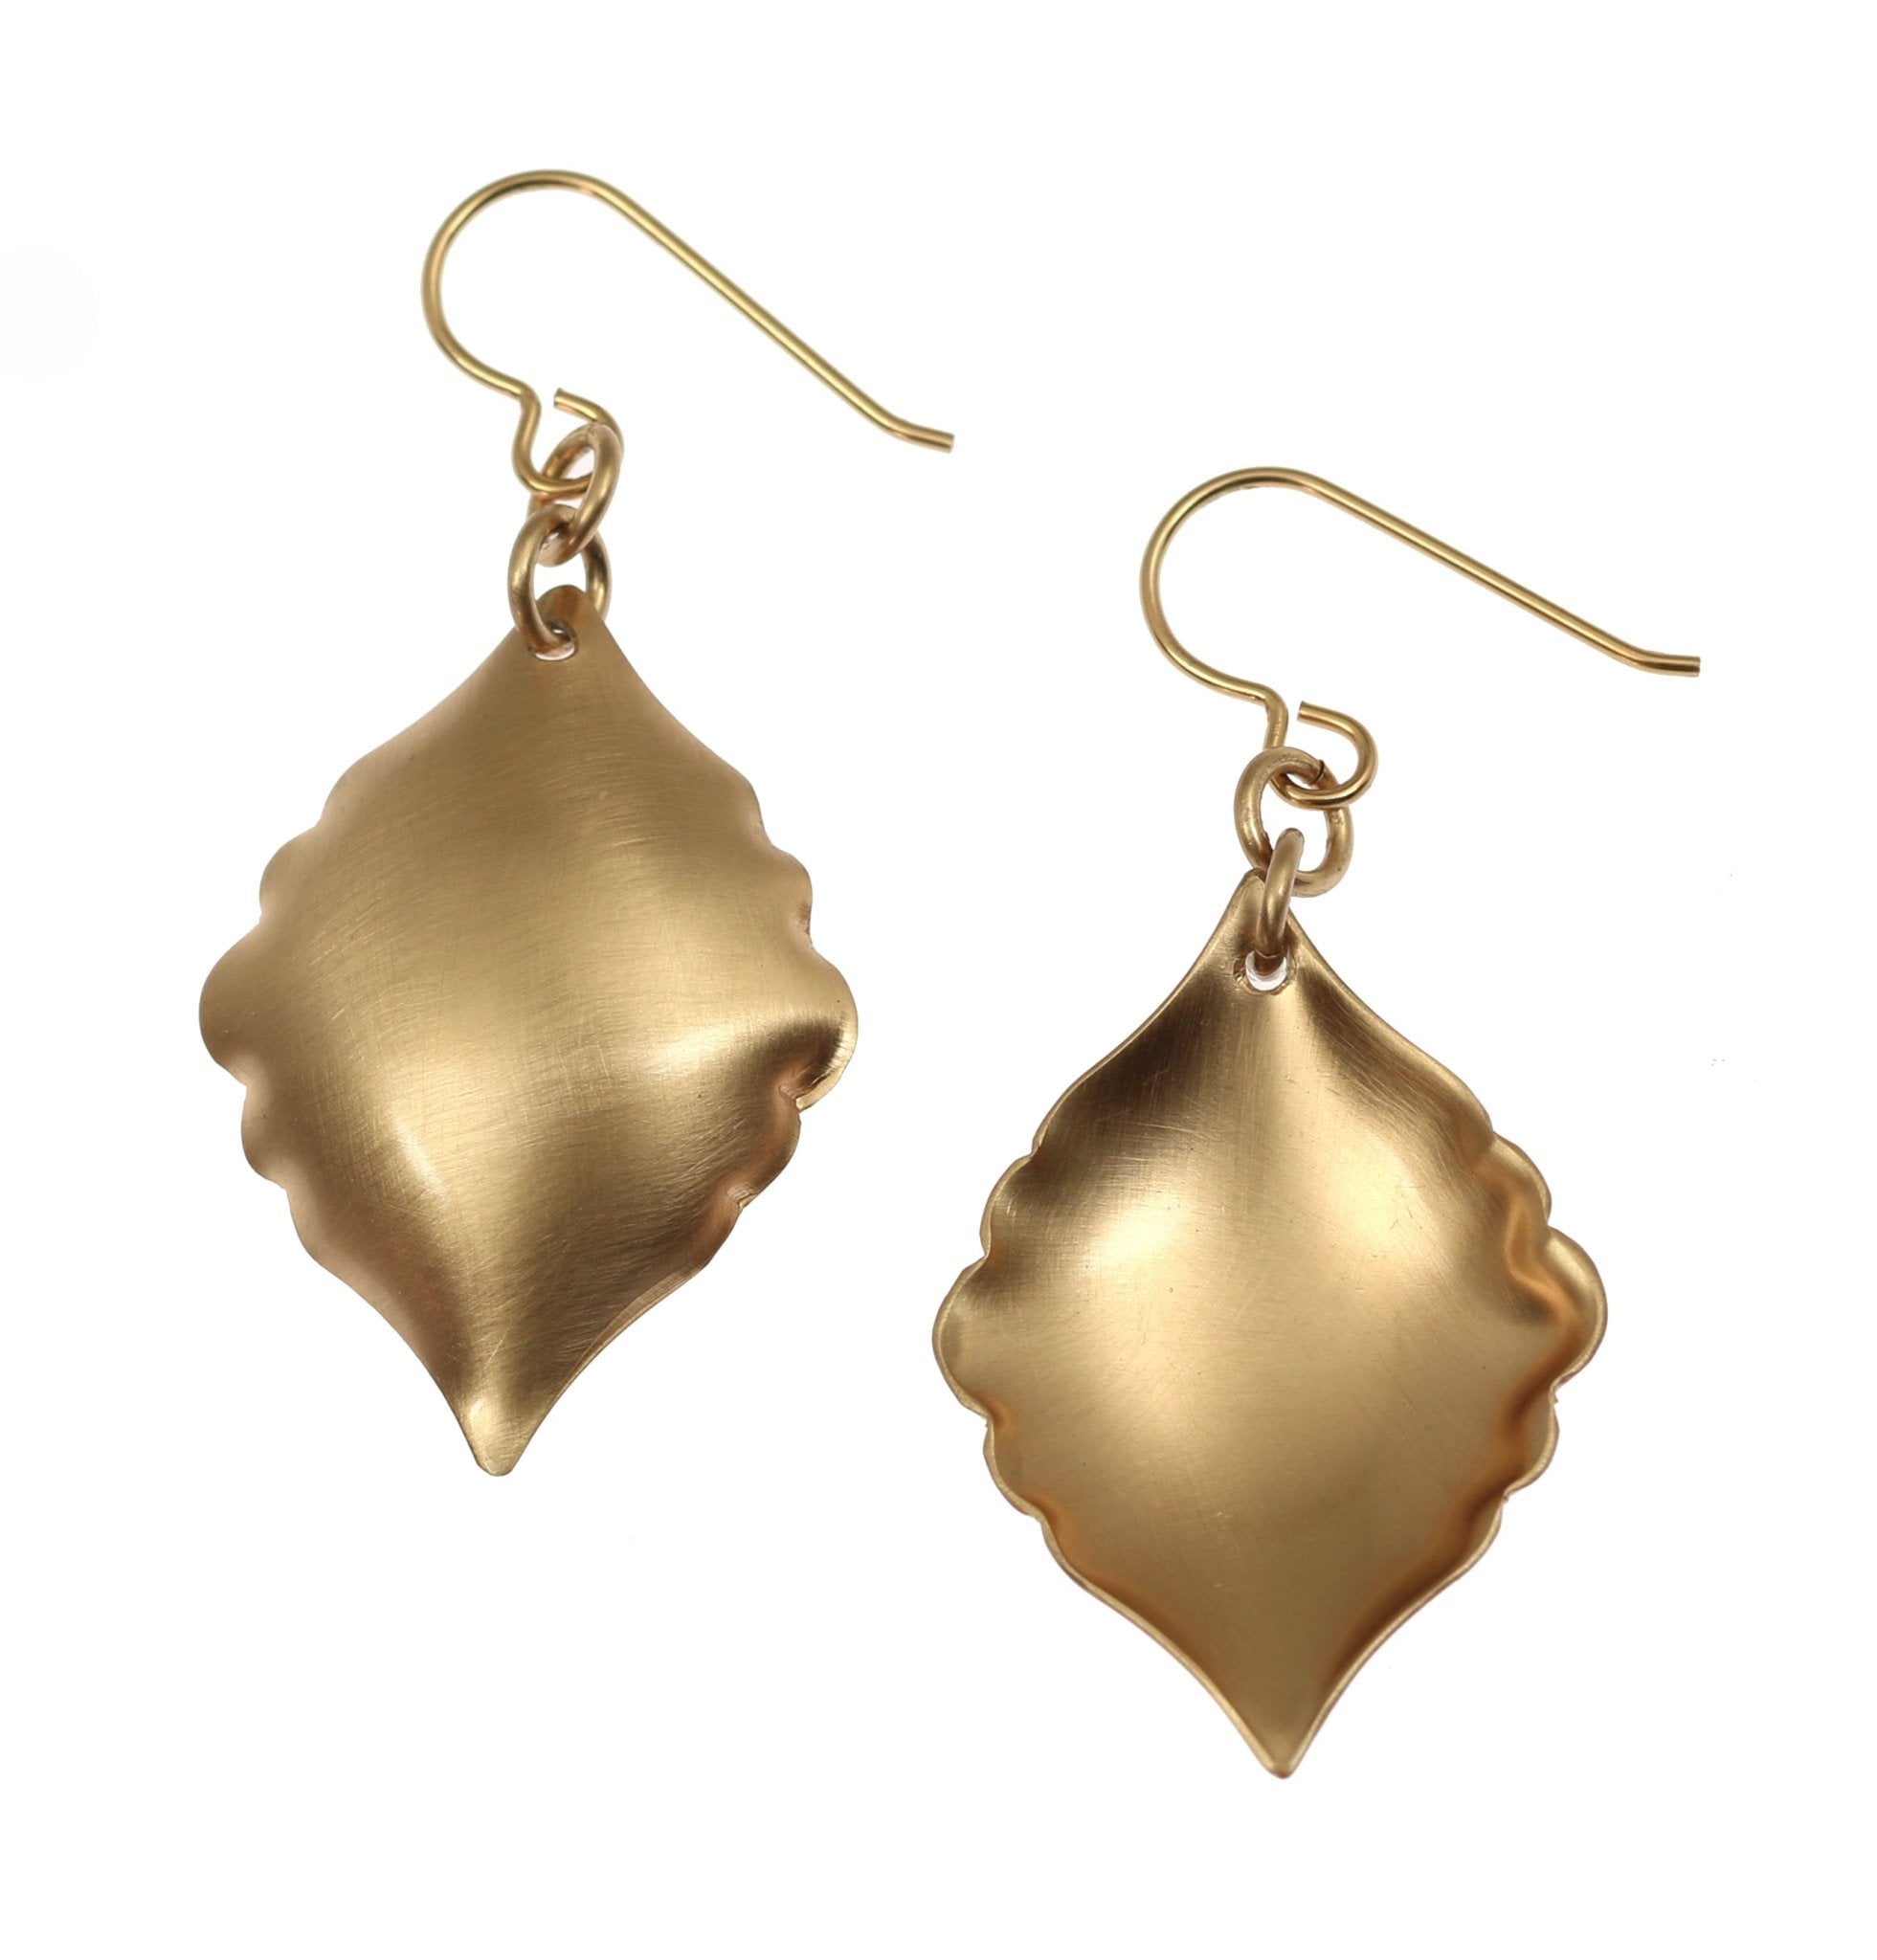 Detail View of Brushed Bronze Moroccan Drop Earrings